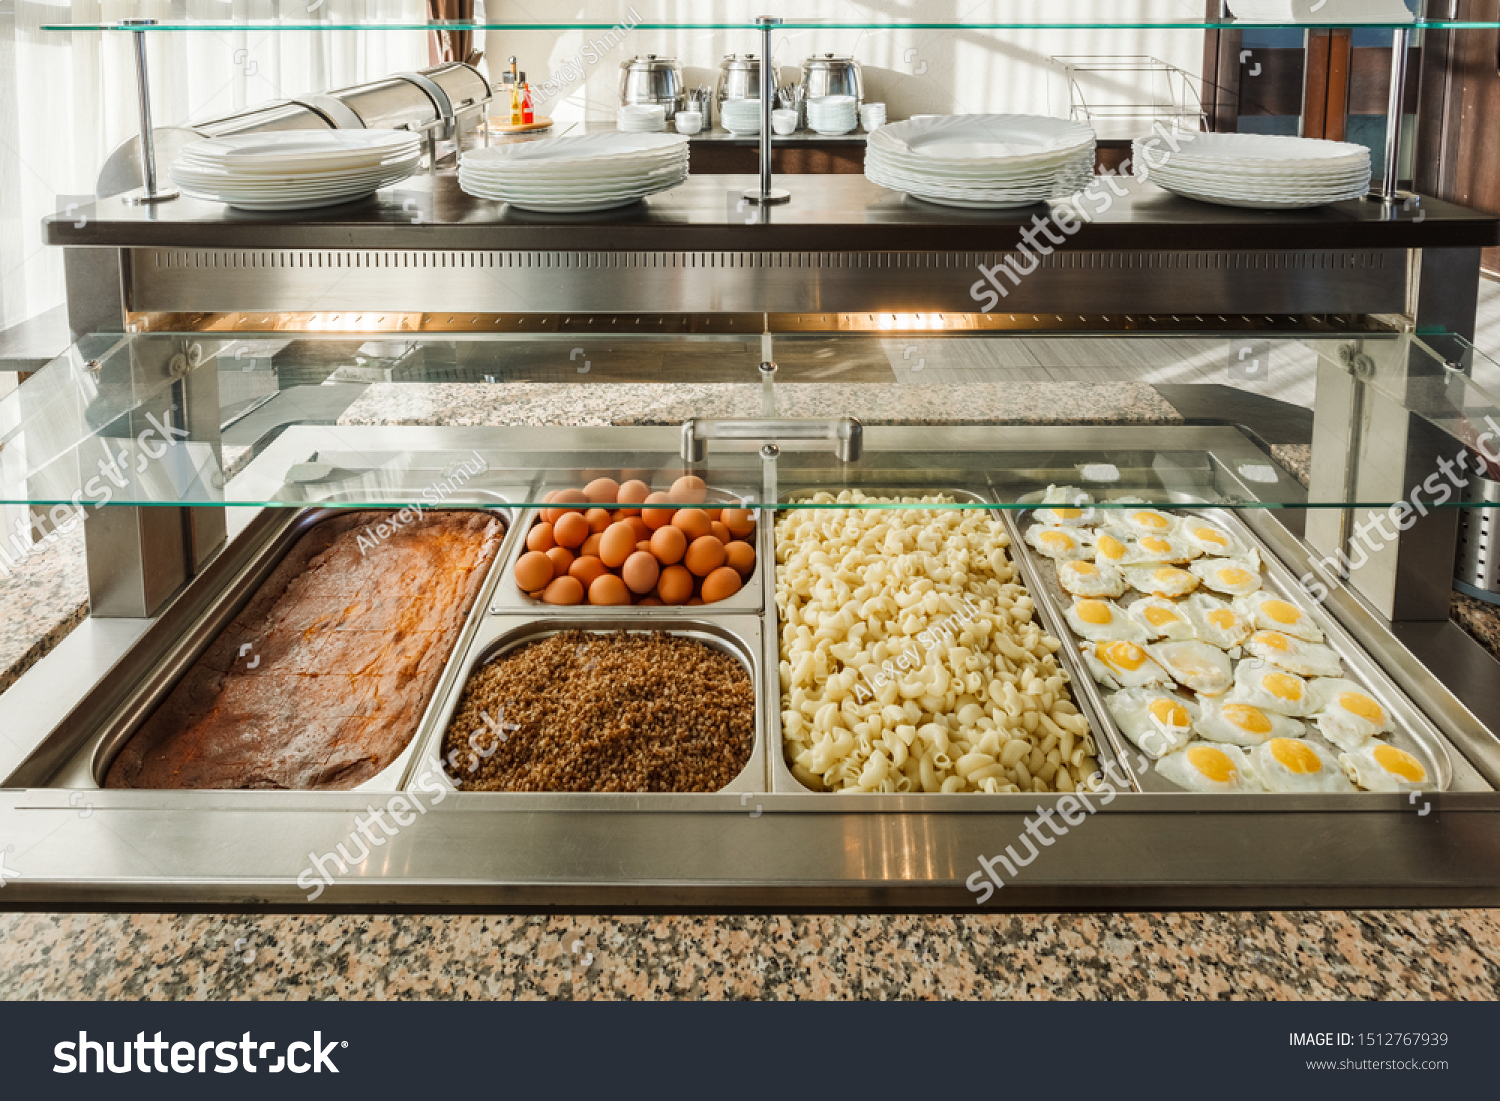 Buffet Dining Room Distribution Dishes Stock Photo Edit Now 1512767939